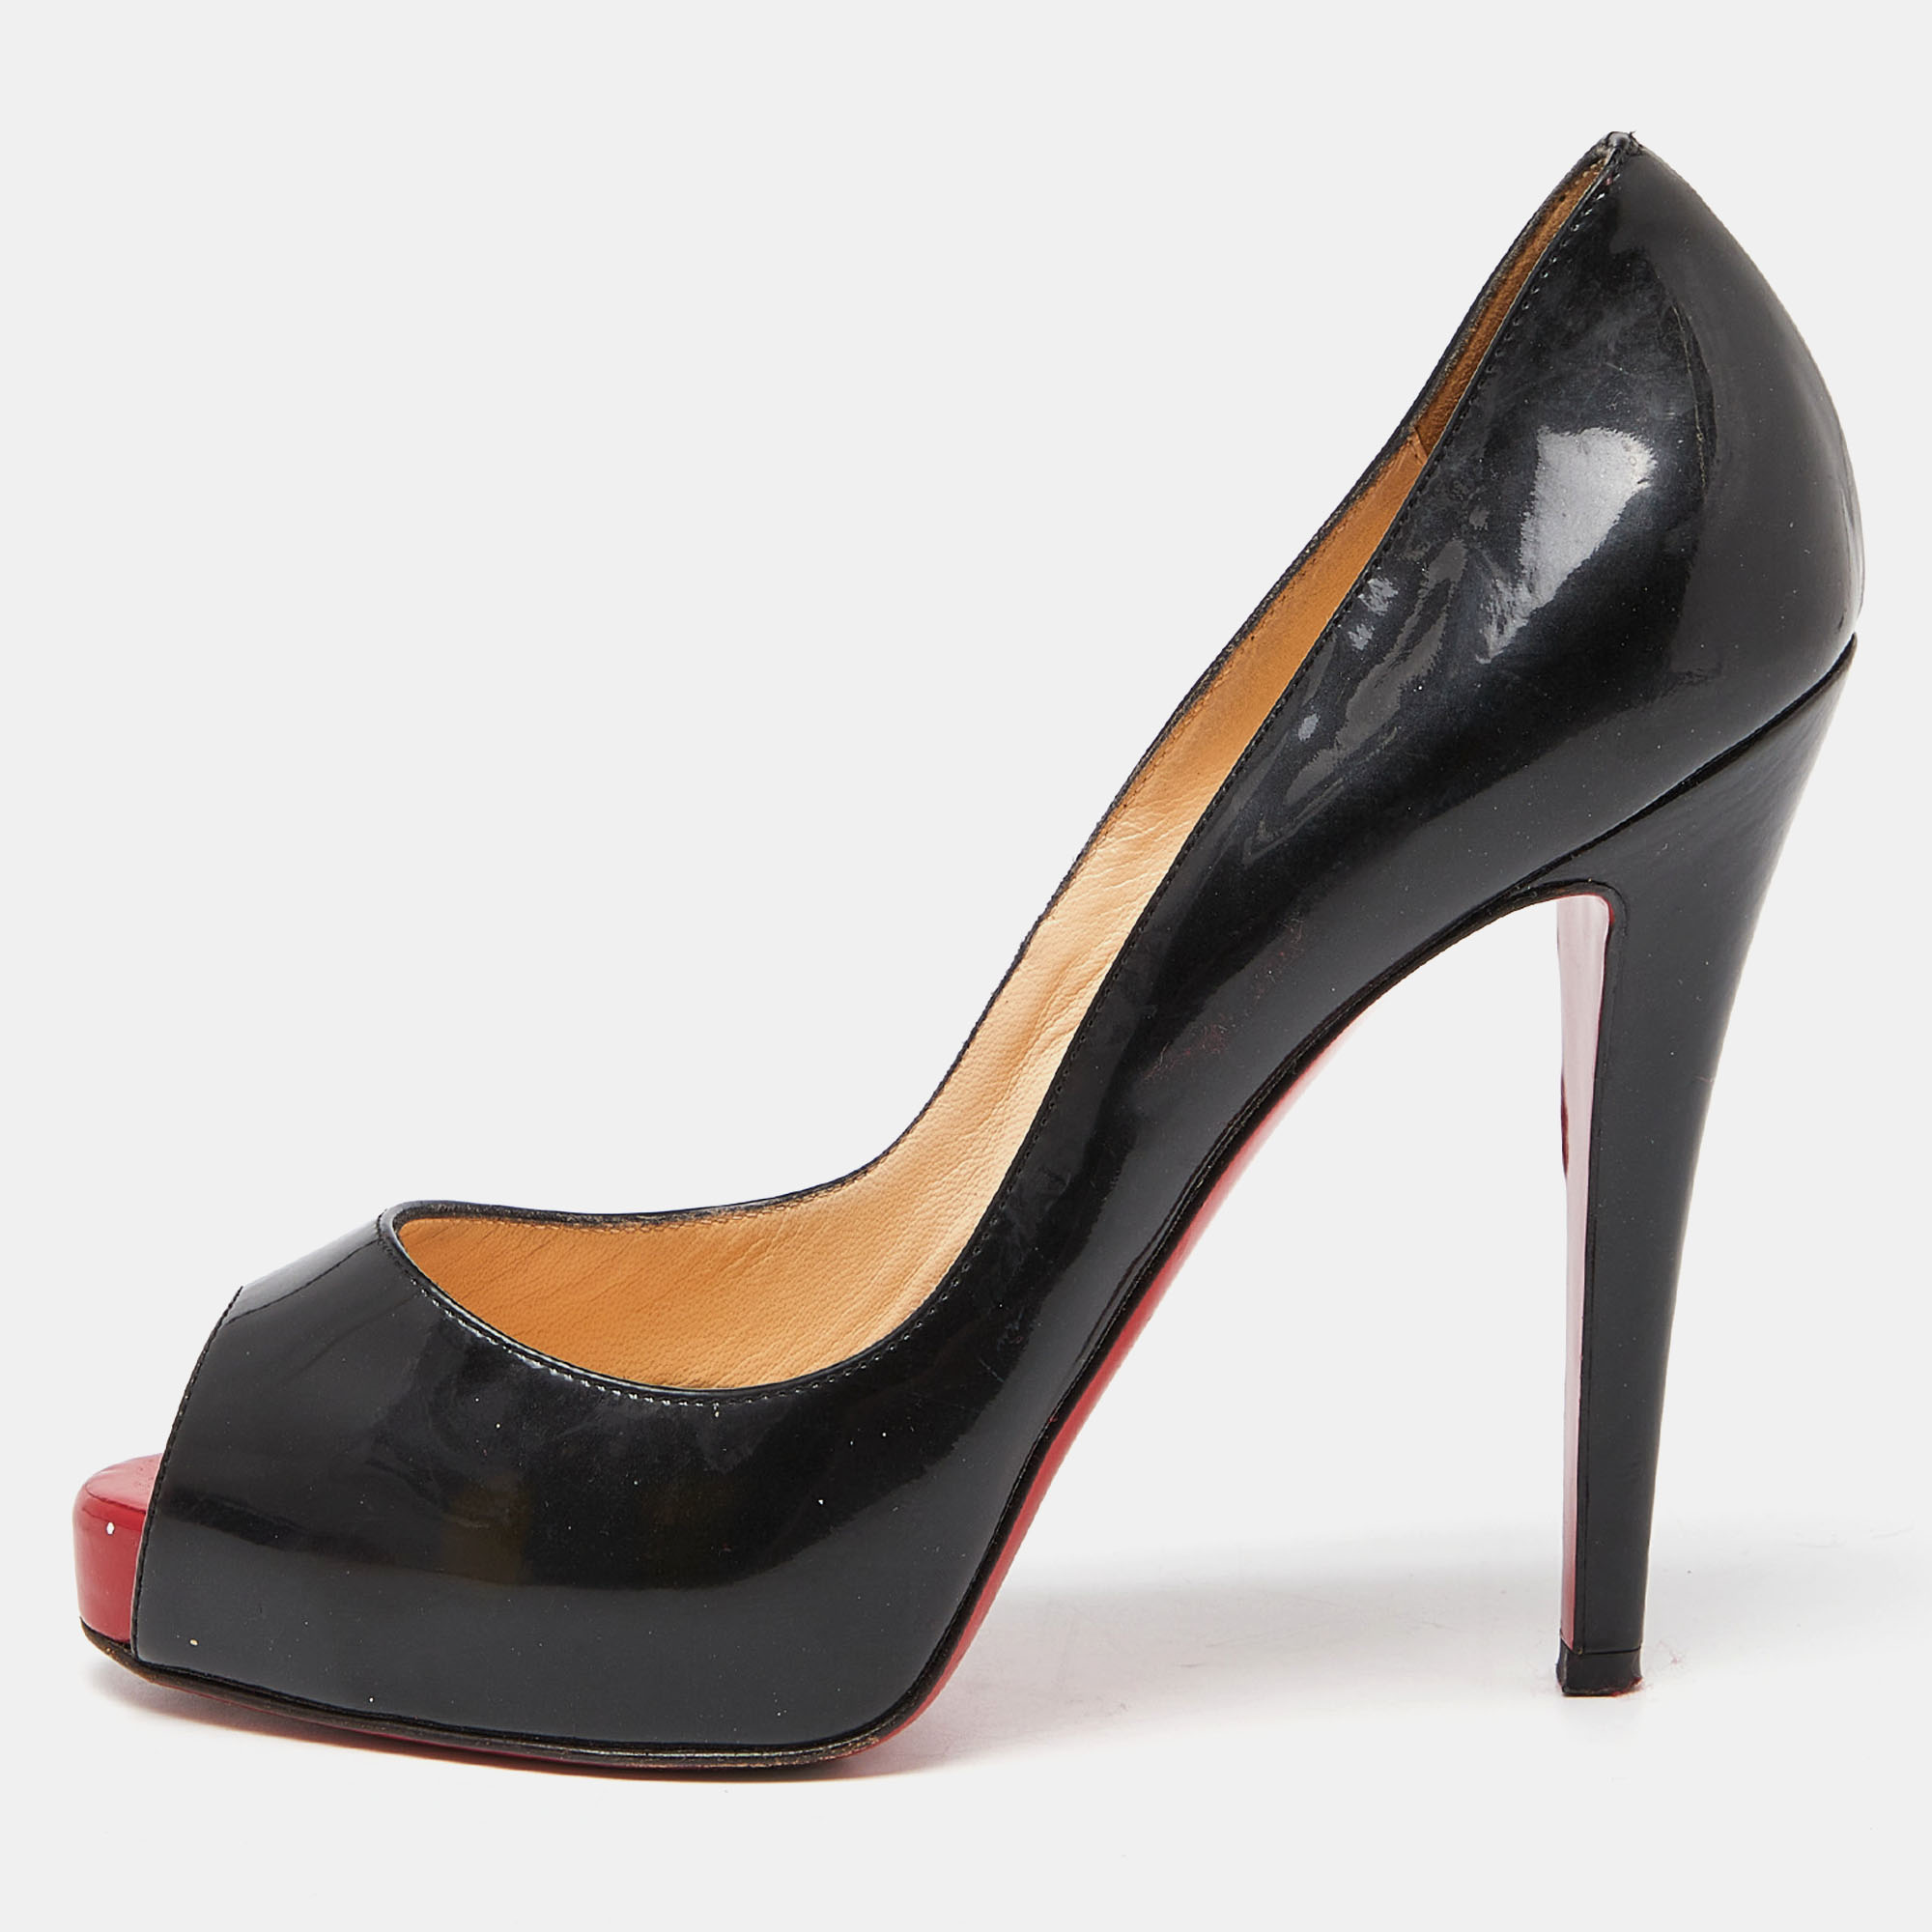 Pre-owned Christian Louboutin Black Patent Leather Very Prive Pumps Size 37